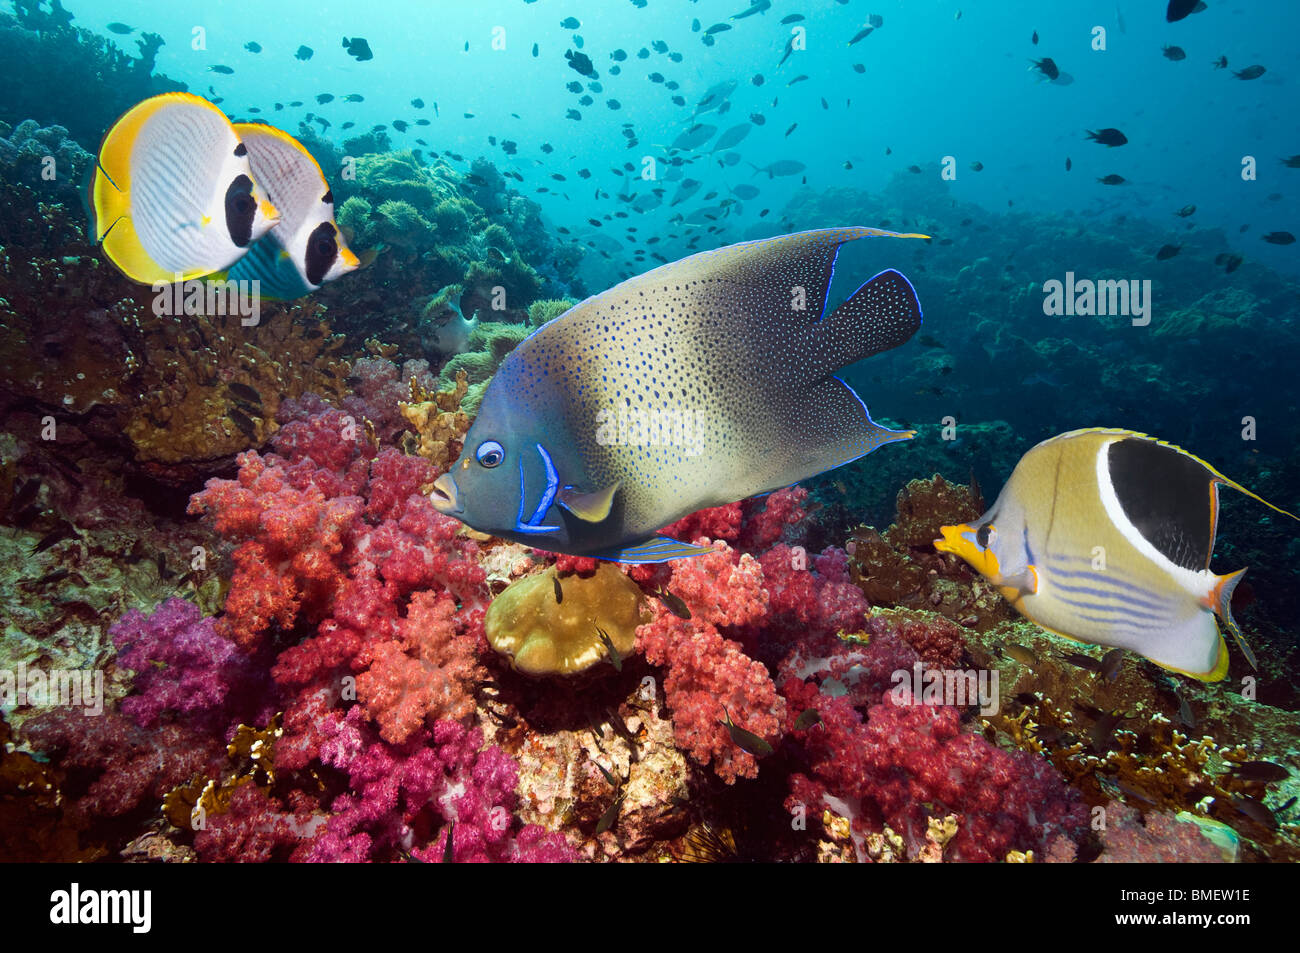 Semicircle angelfish, Saddled and Panda butterflyfish with soft corals, Misool, Raja Ampat, West Papua, Indonesia. Stock Photo